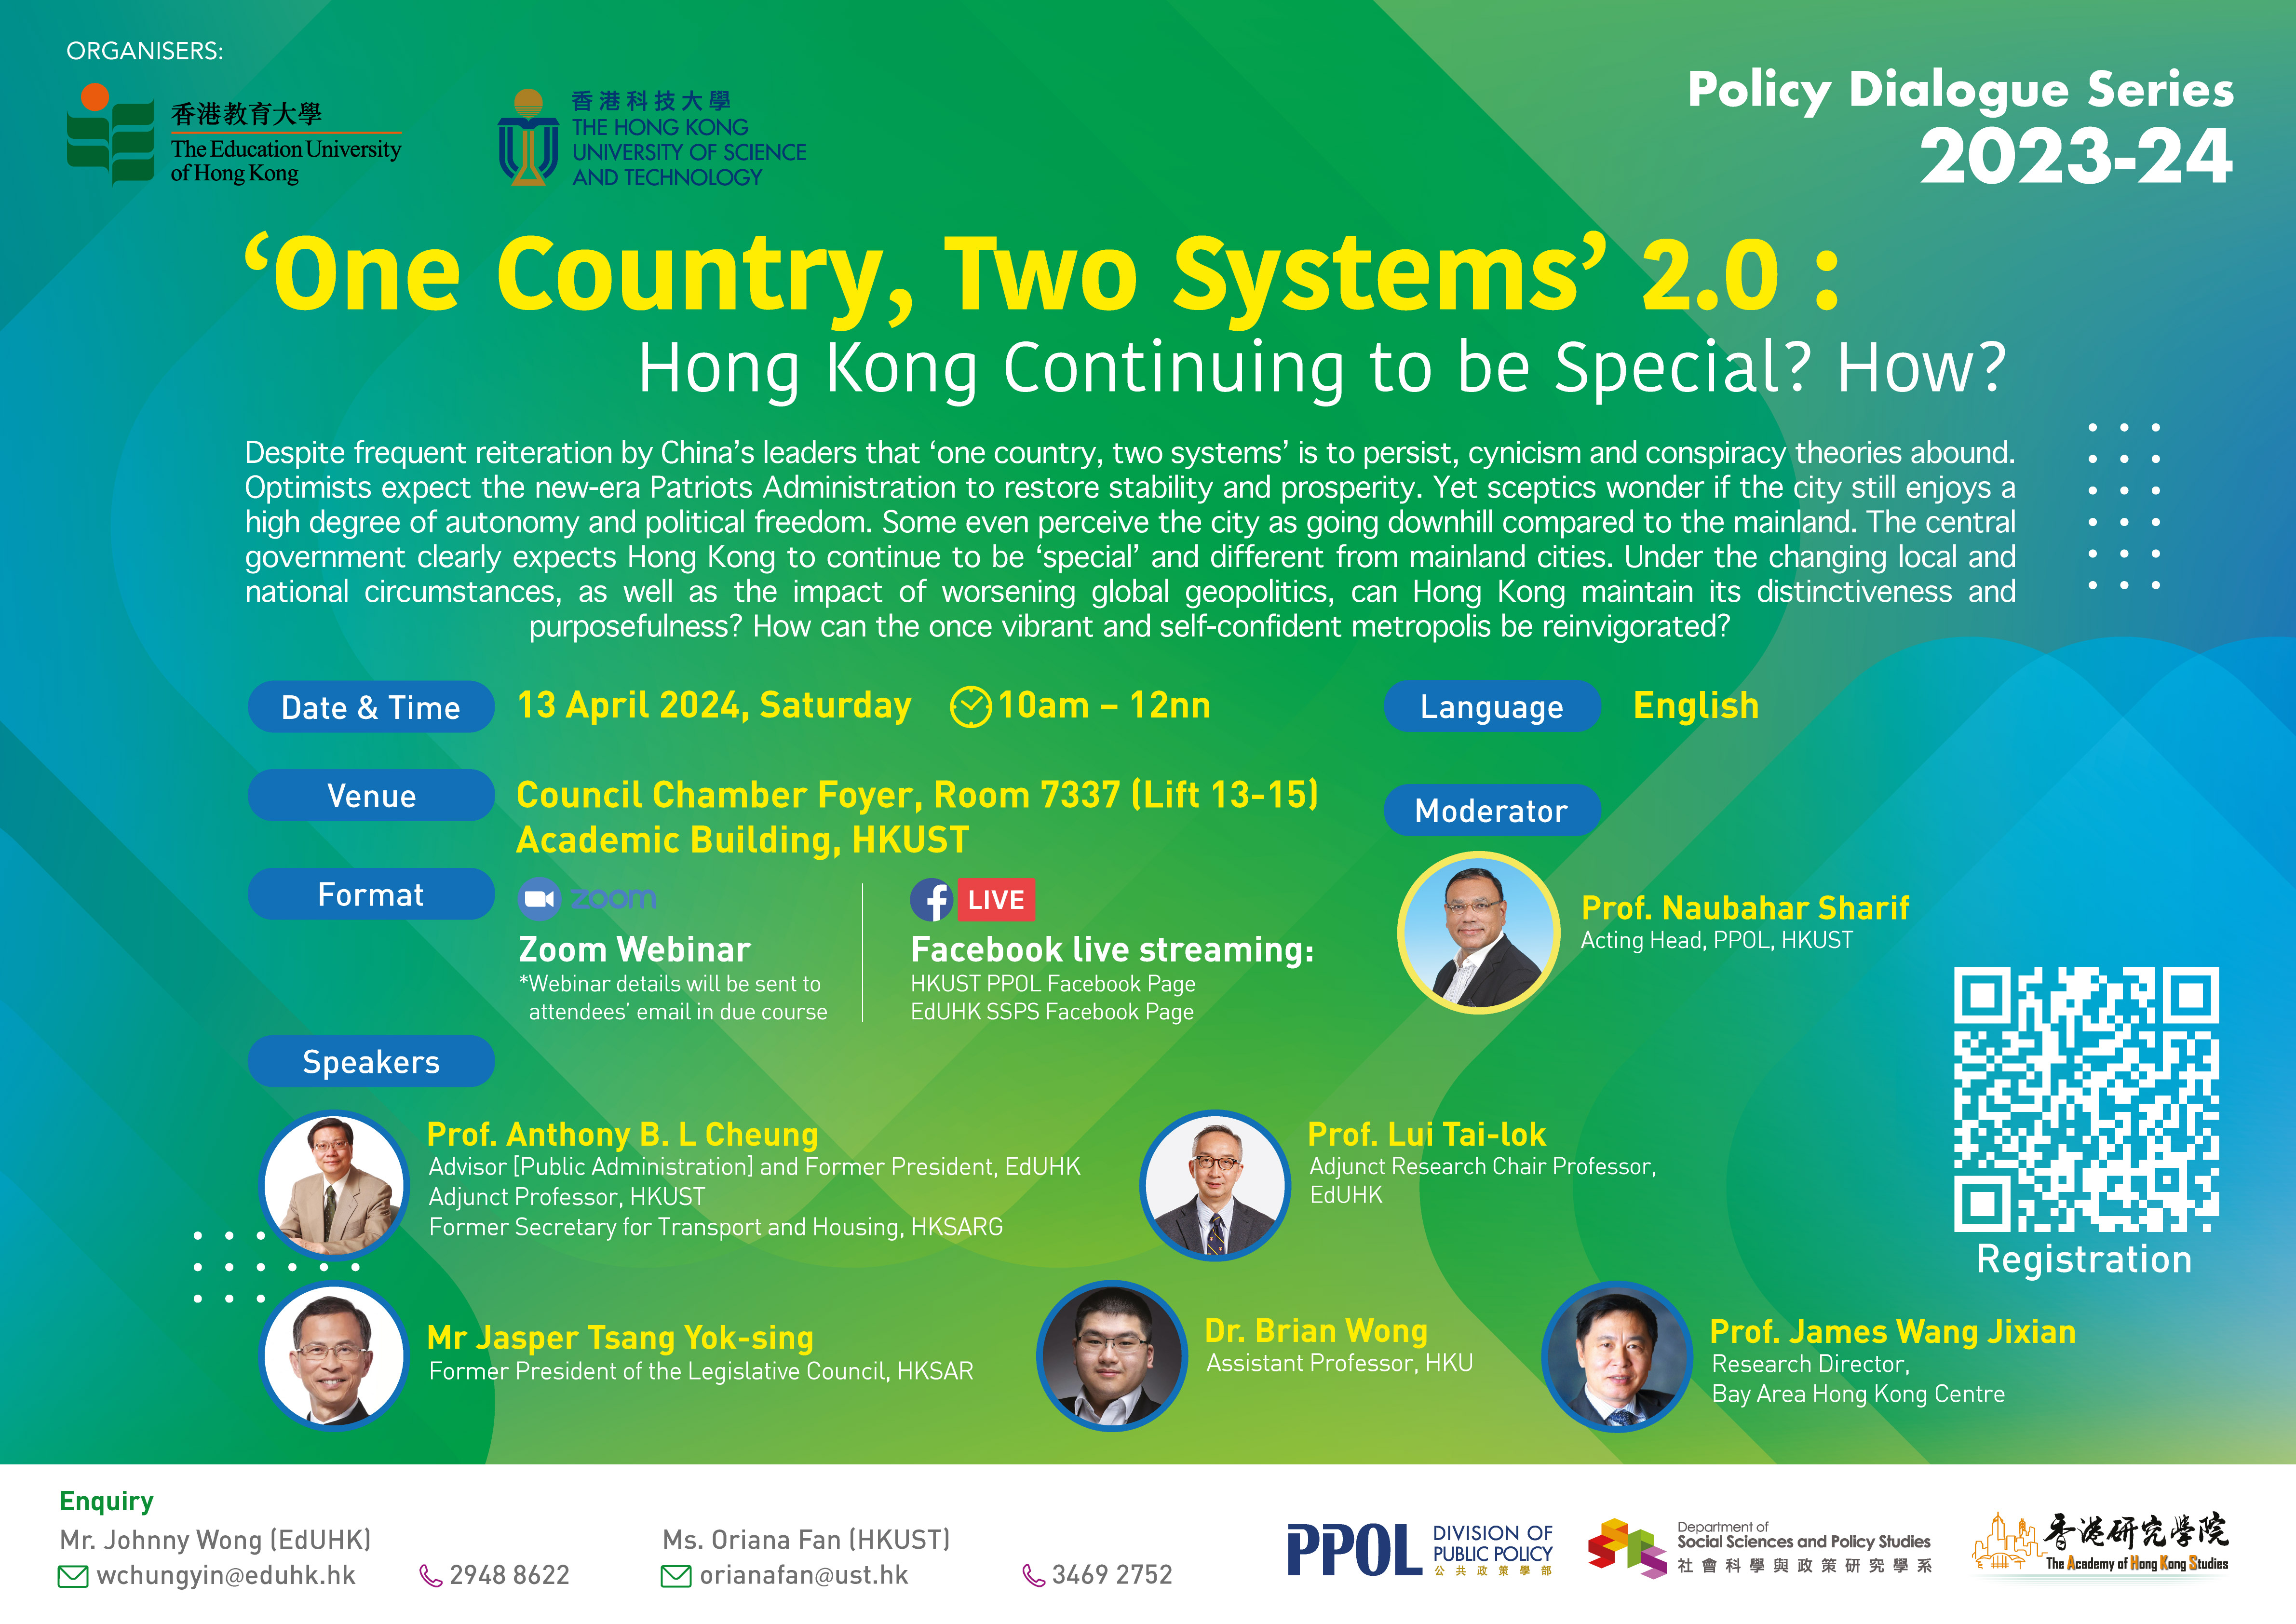 ‘One Country, Two Systems' 2.0: Hong Kong Continuing to be Special? How?